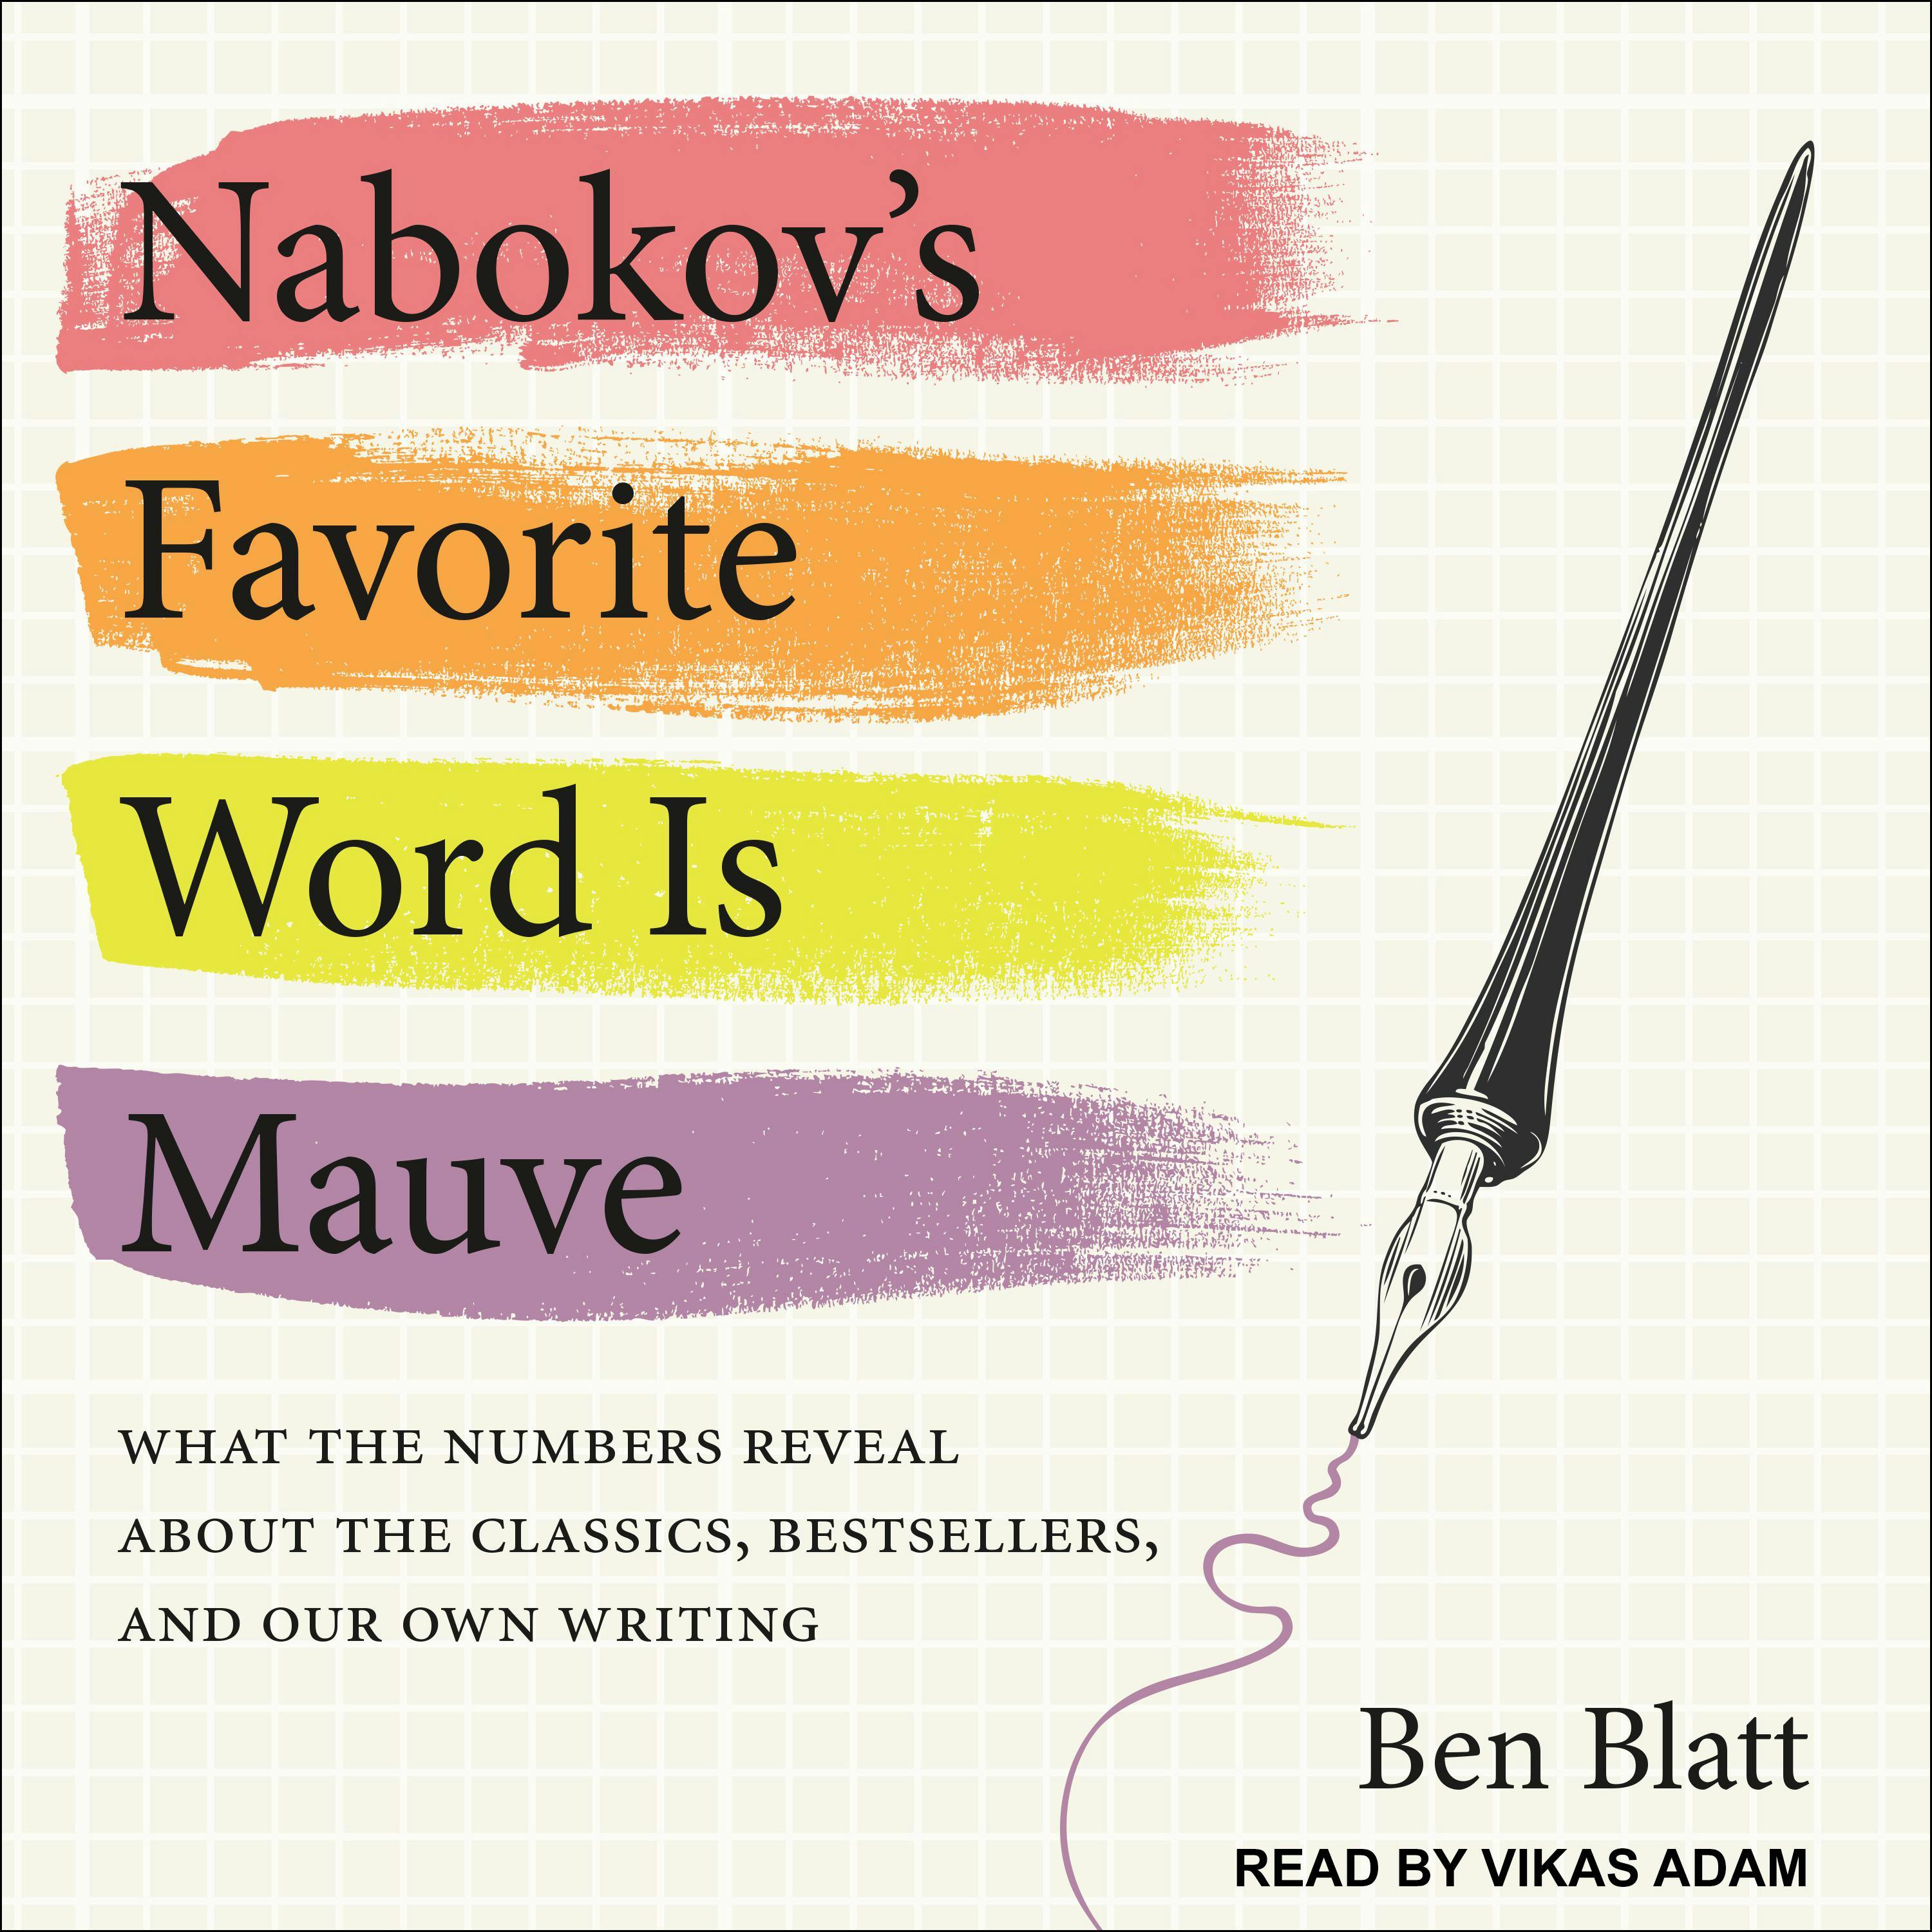 Nabokov's Favorite Word Is Mauve: What the Numbers Reveal About the Classics, Bestsellers, and Our Own Writing - Ben Blatt